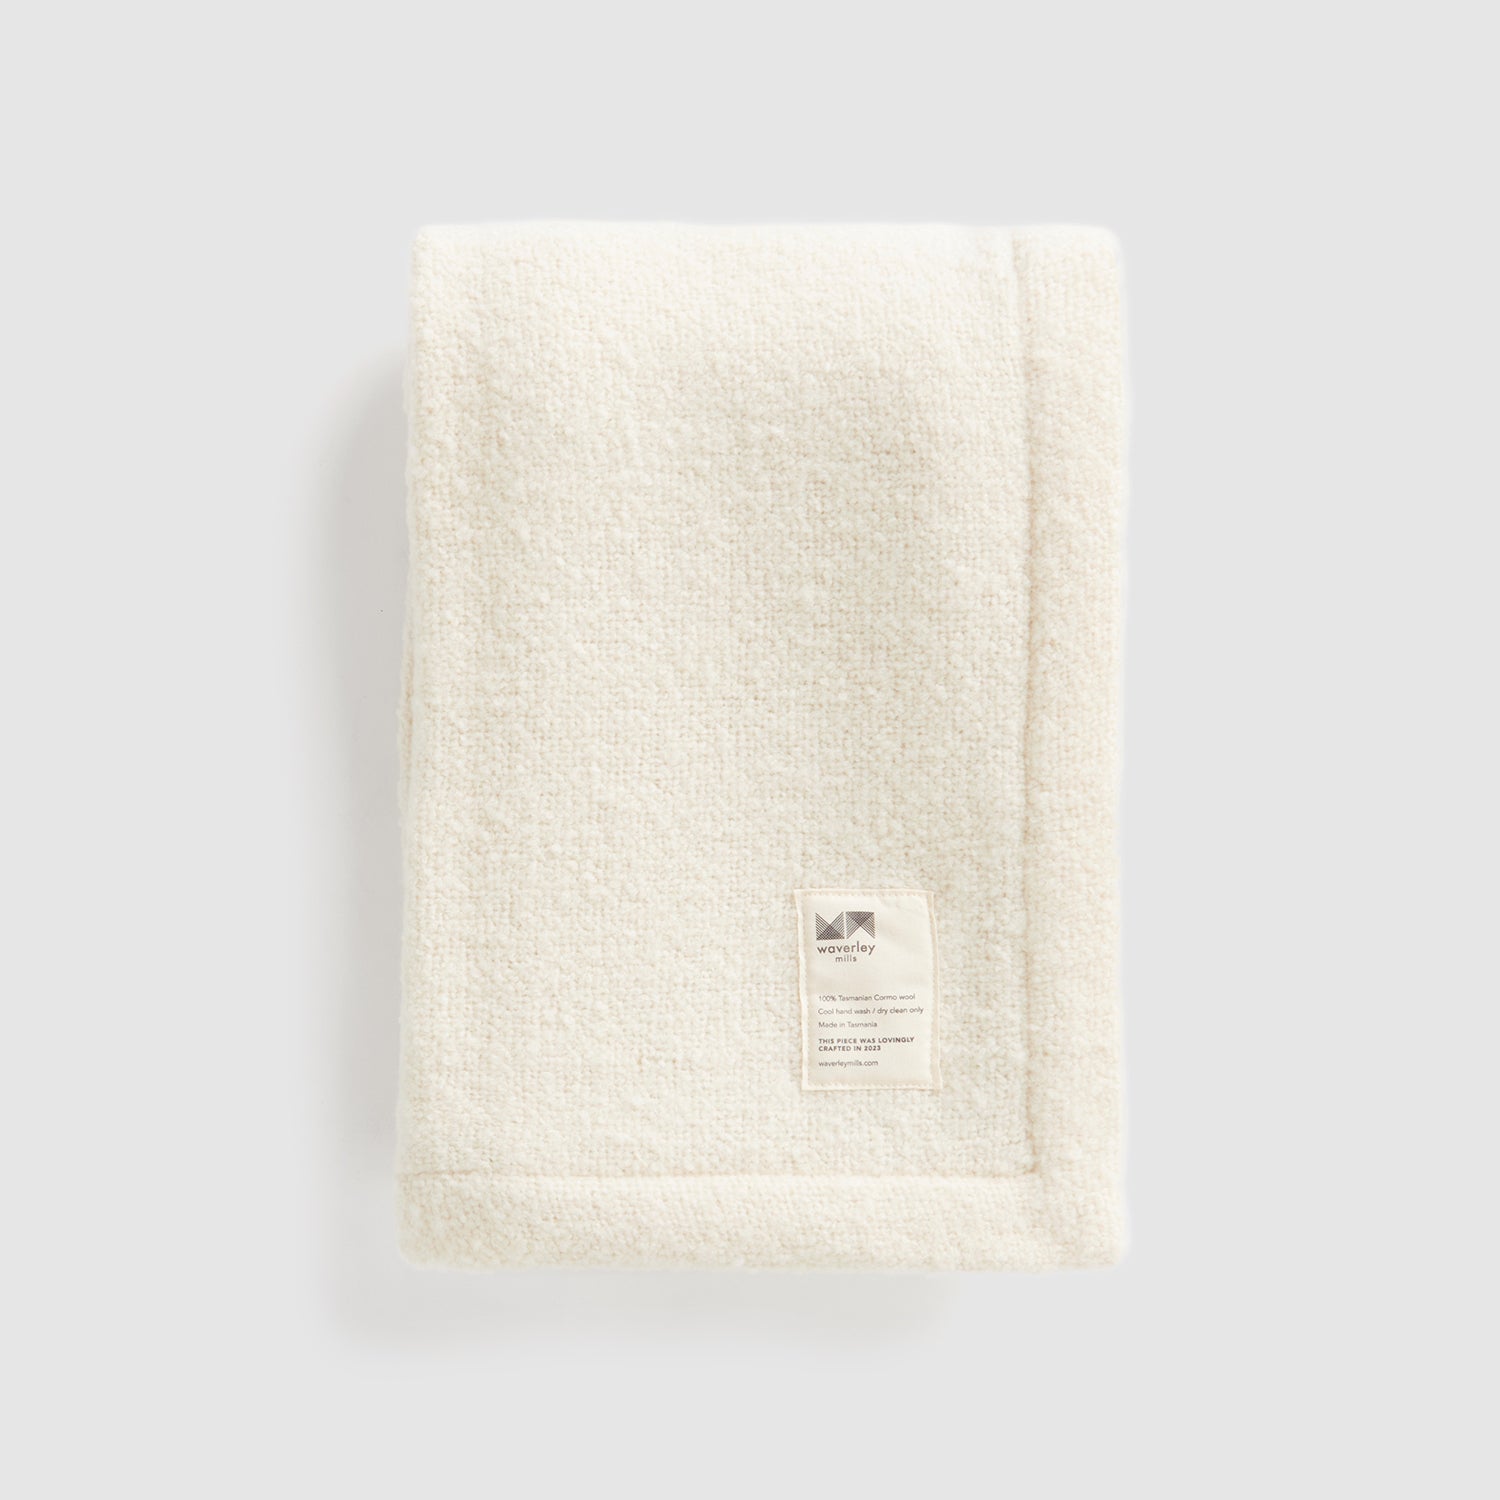 A folded cooper's cormo baby blanket in natural.